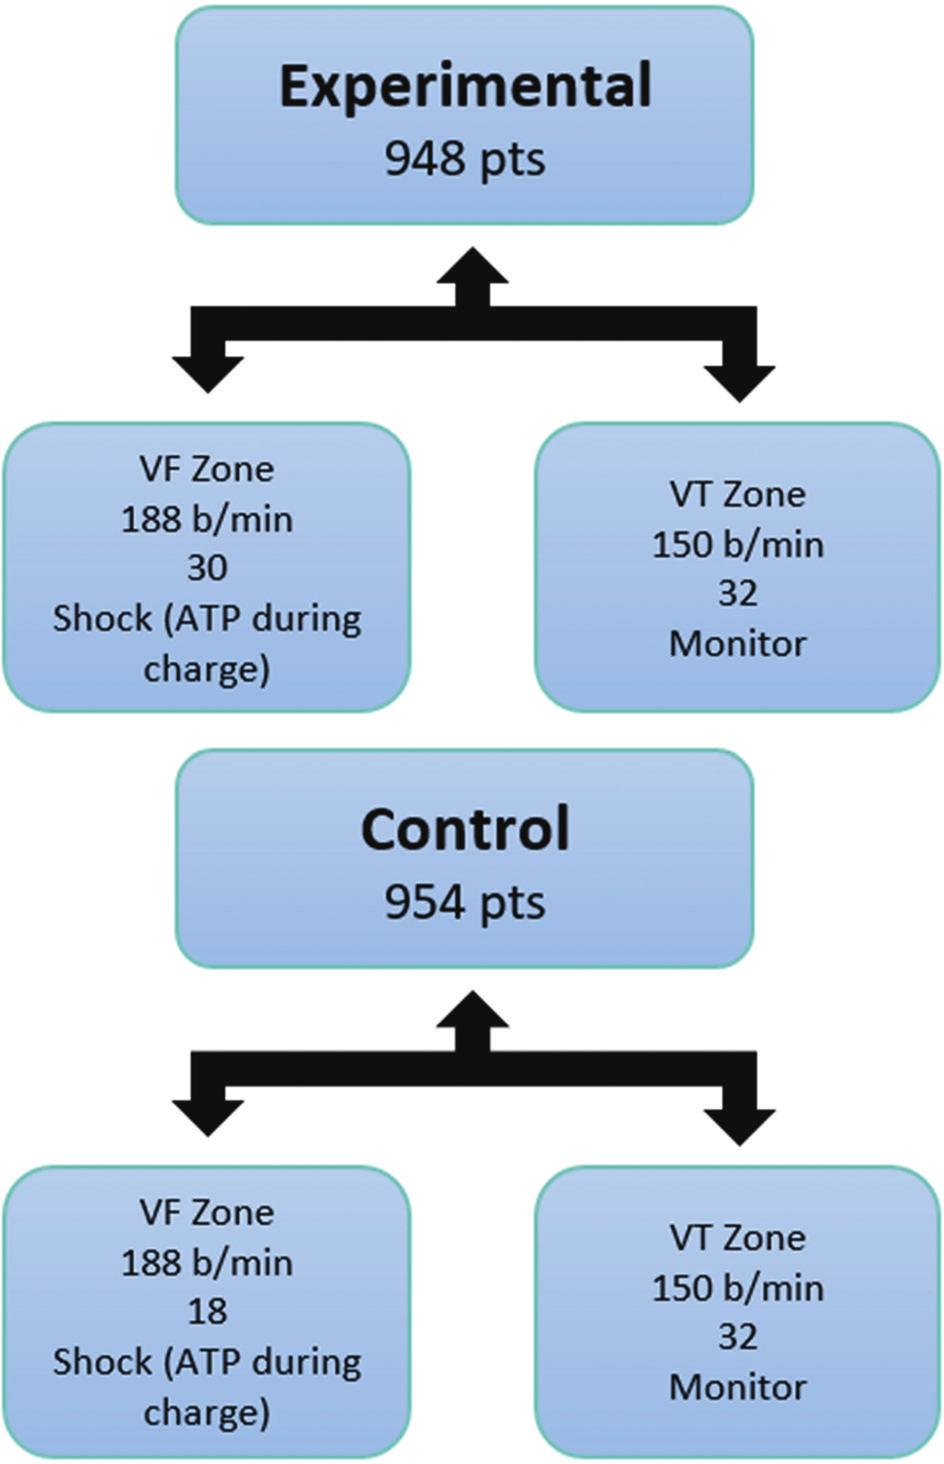 A Review of ICD Anti-Tachycardia Therapy Programming with Generic Programming... http://dx.doi.org/10.5772/intechopen.